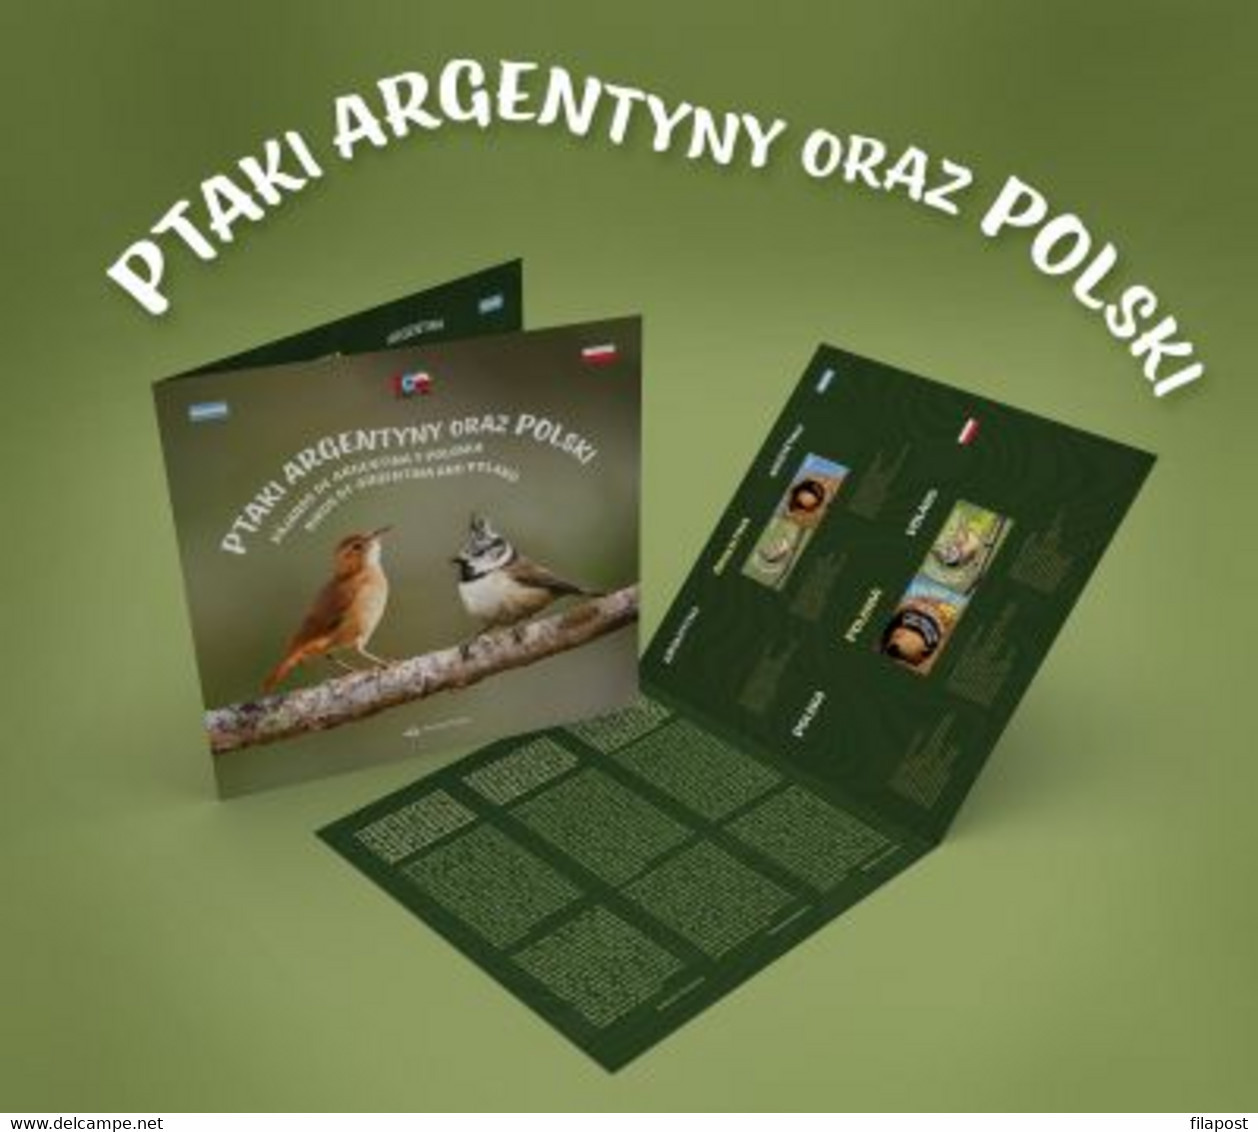 Poland 2023 Booklet - Joint Issue / Birds Of Argentina And Poland, Argentina, Poland, Animals, Birds, Animal - Booklets